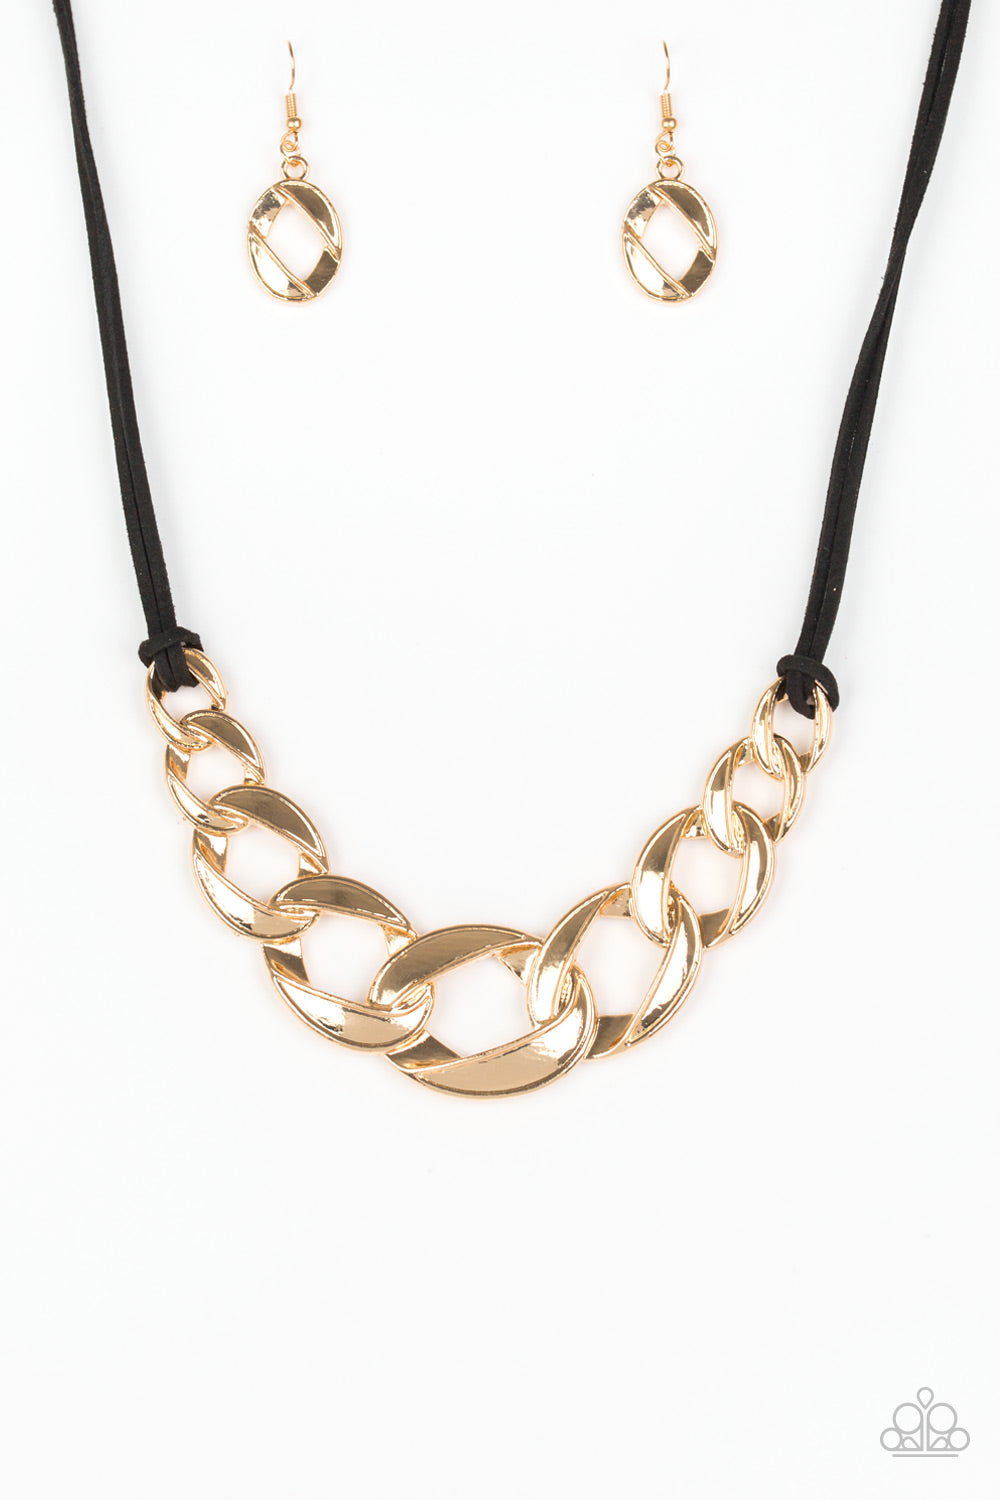 Paparazzi Accessories Naturally Nautical - Gold Necklaces - Lady T Accessories